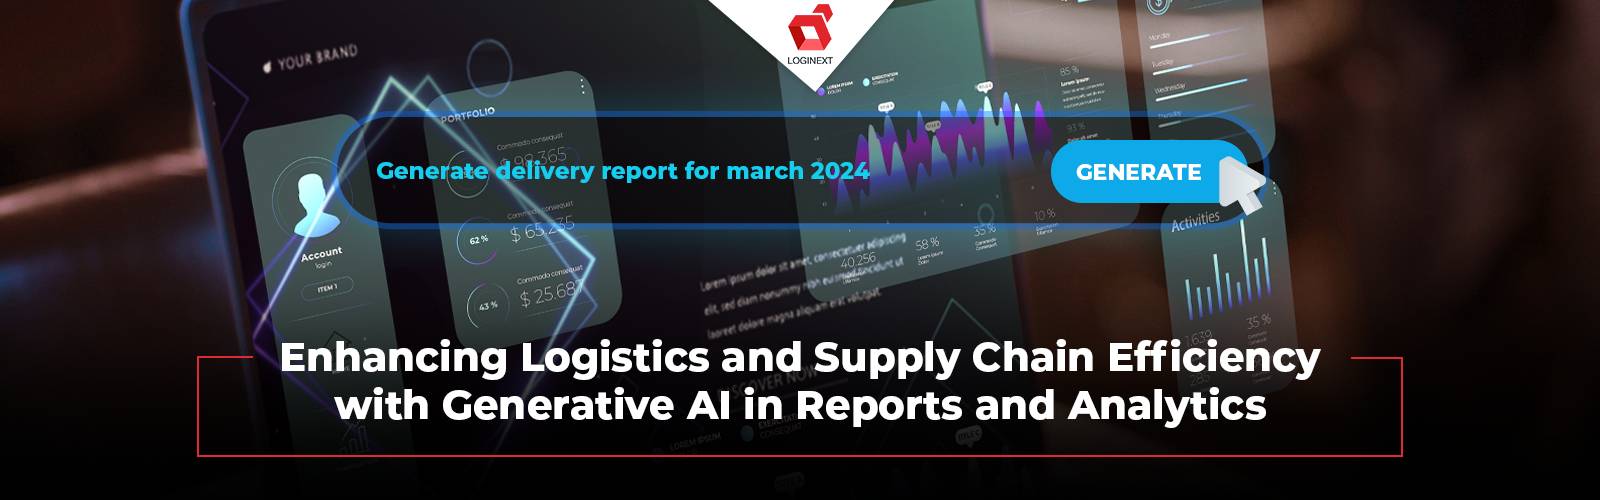 Generative AI in reports and analytics for logistics management